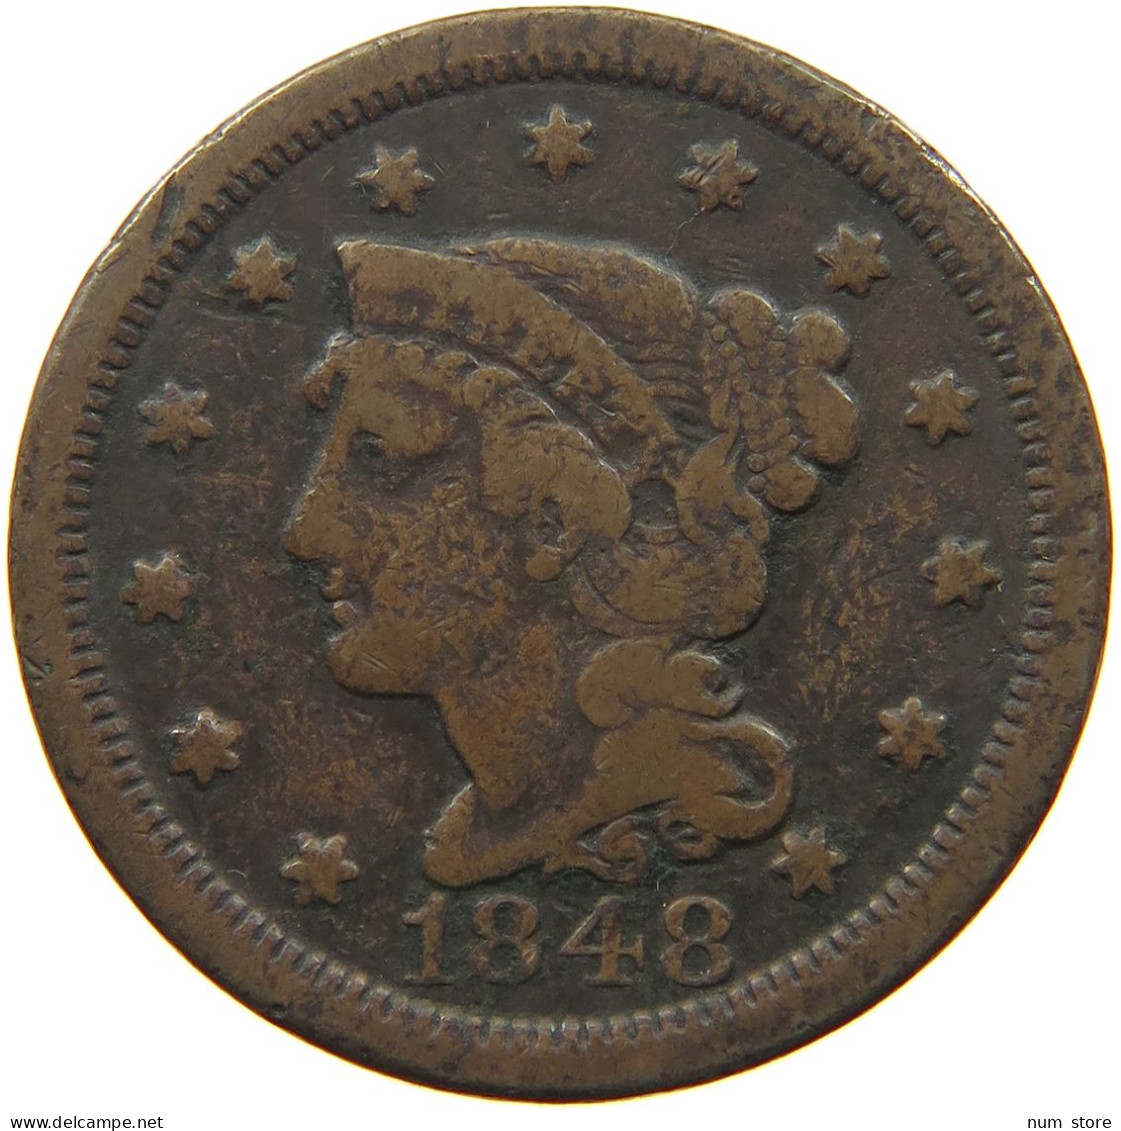 UNITED STATES OF AMERICA LARGE CENT 1848 BRAIDED HAIR #t141 0257 - 1840-1857: Braided Hair